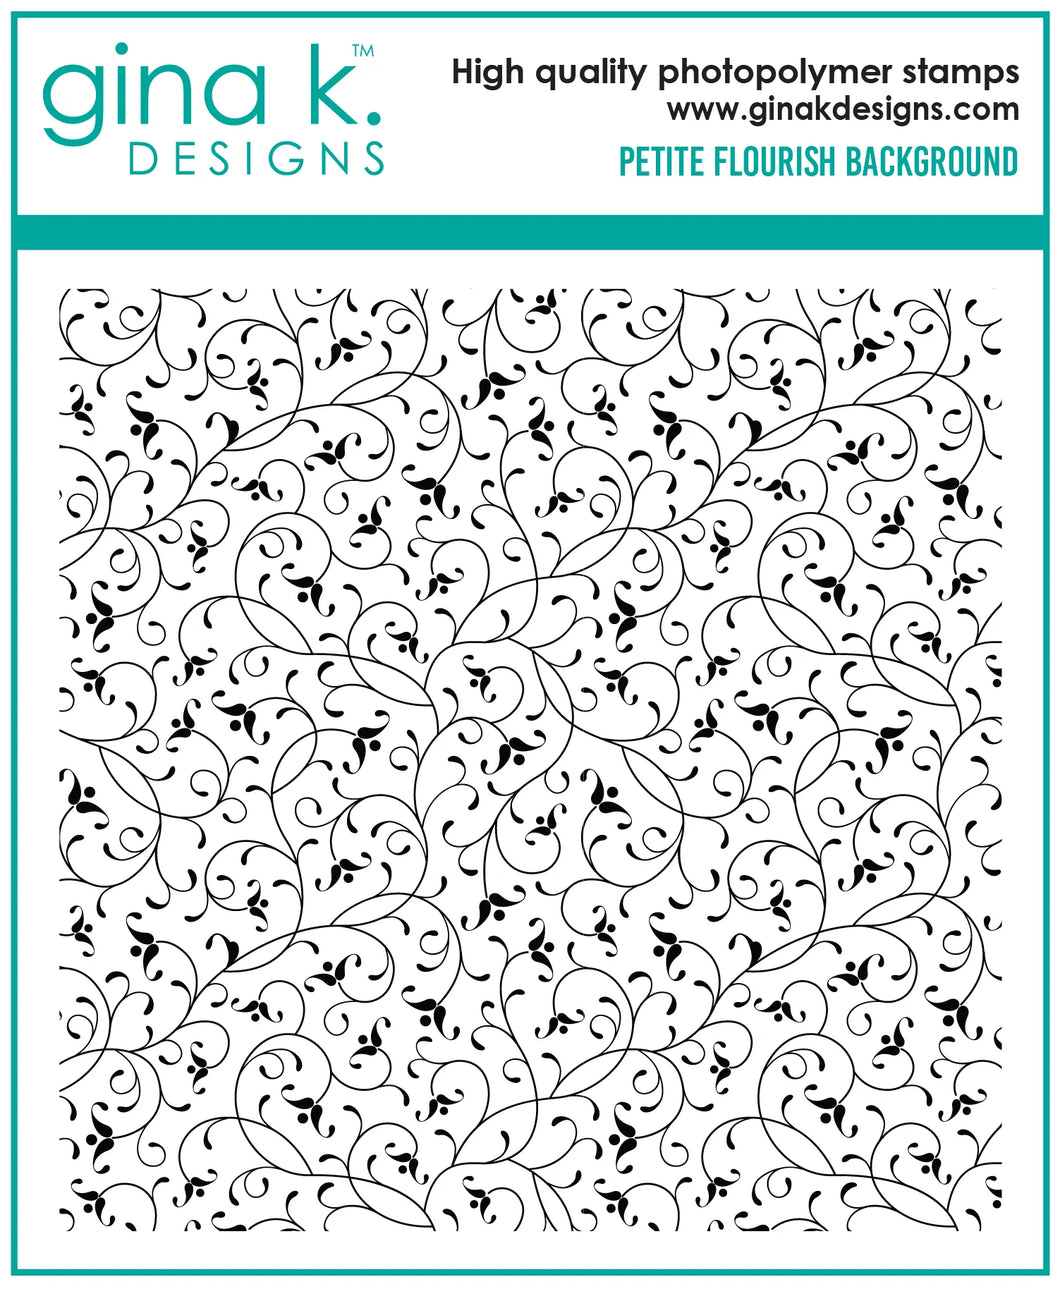 Gina K. Designs - Background Stamp - Petite Flourish. Petite Flourish is a stamp set by Gina K Designs. This set is made of premium clear photopolymer and measures 6